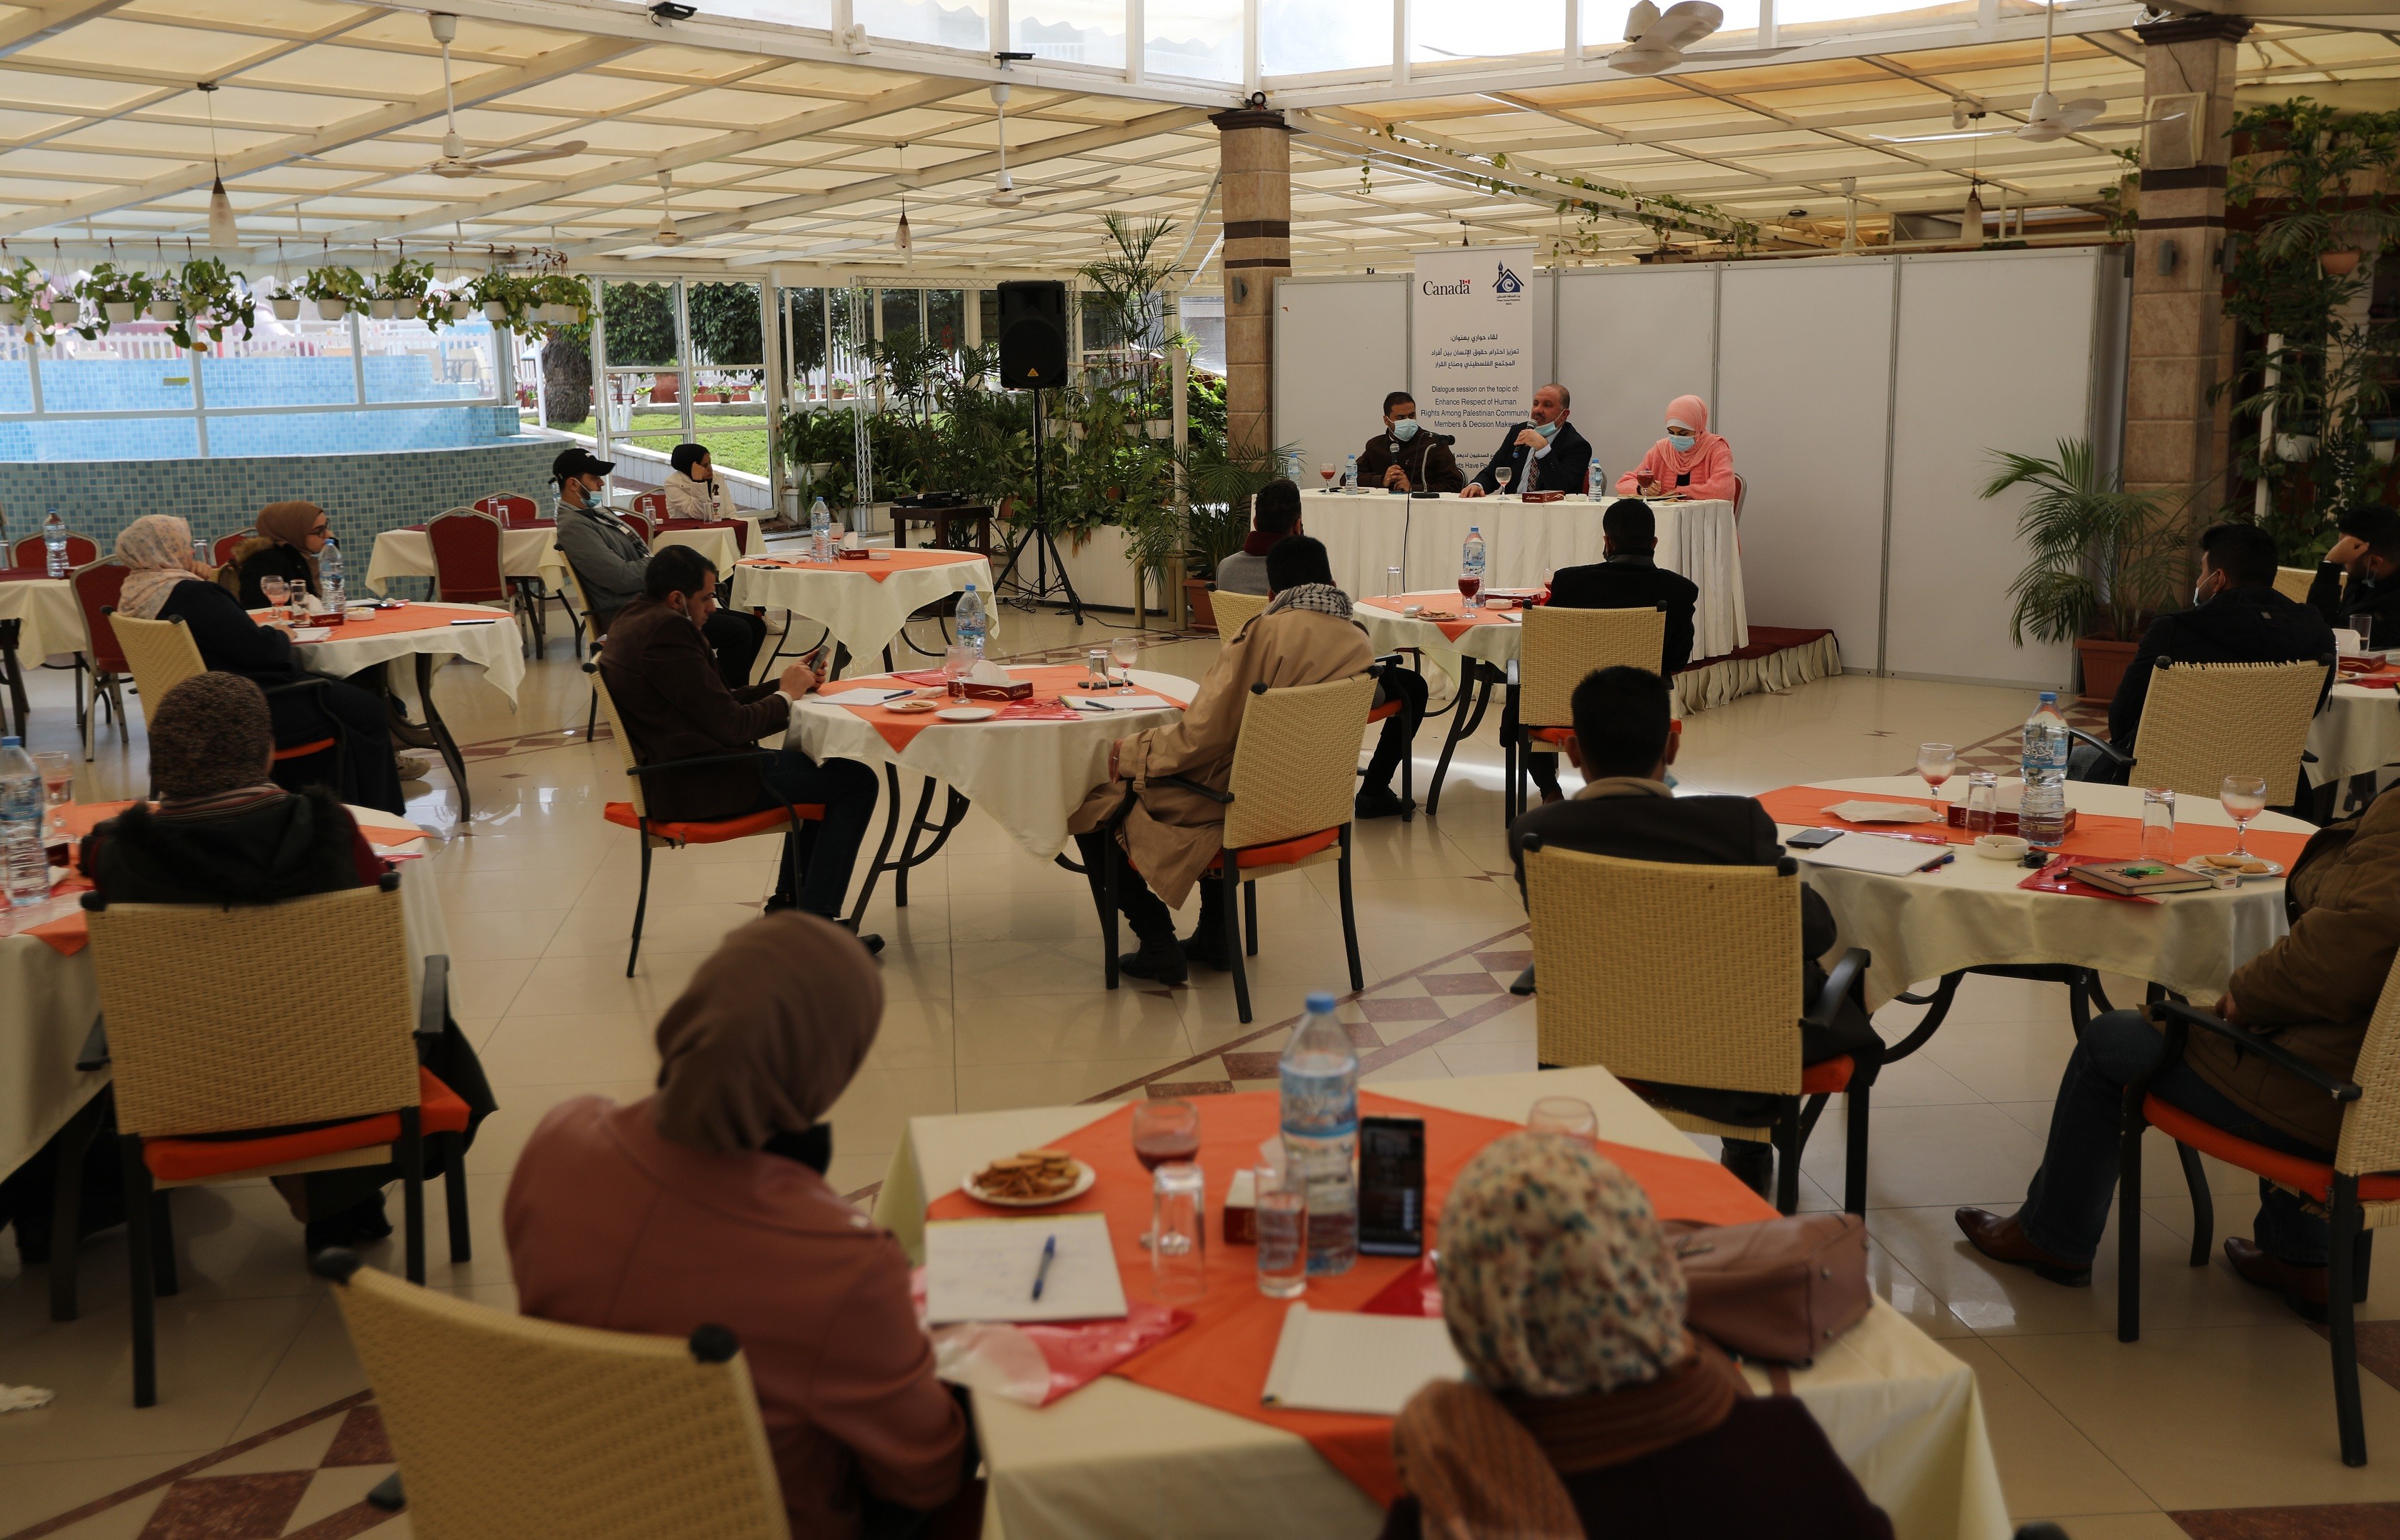 Press House organizes a dialogue session on the topic of “Enhancing Respect of Human Rights Among Palestinian Community Members & Decision Makers” 